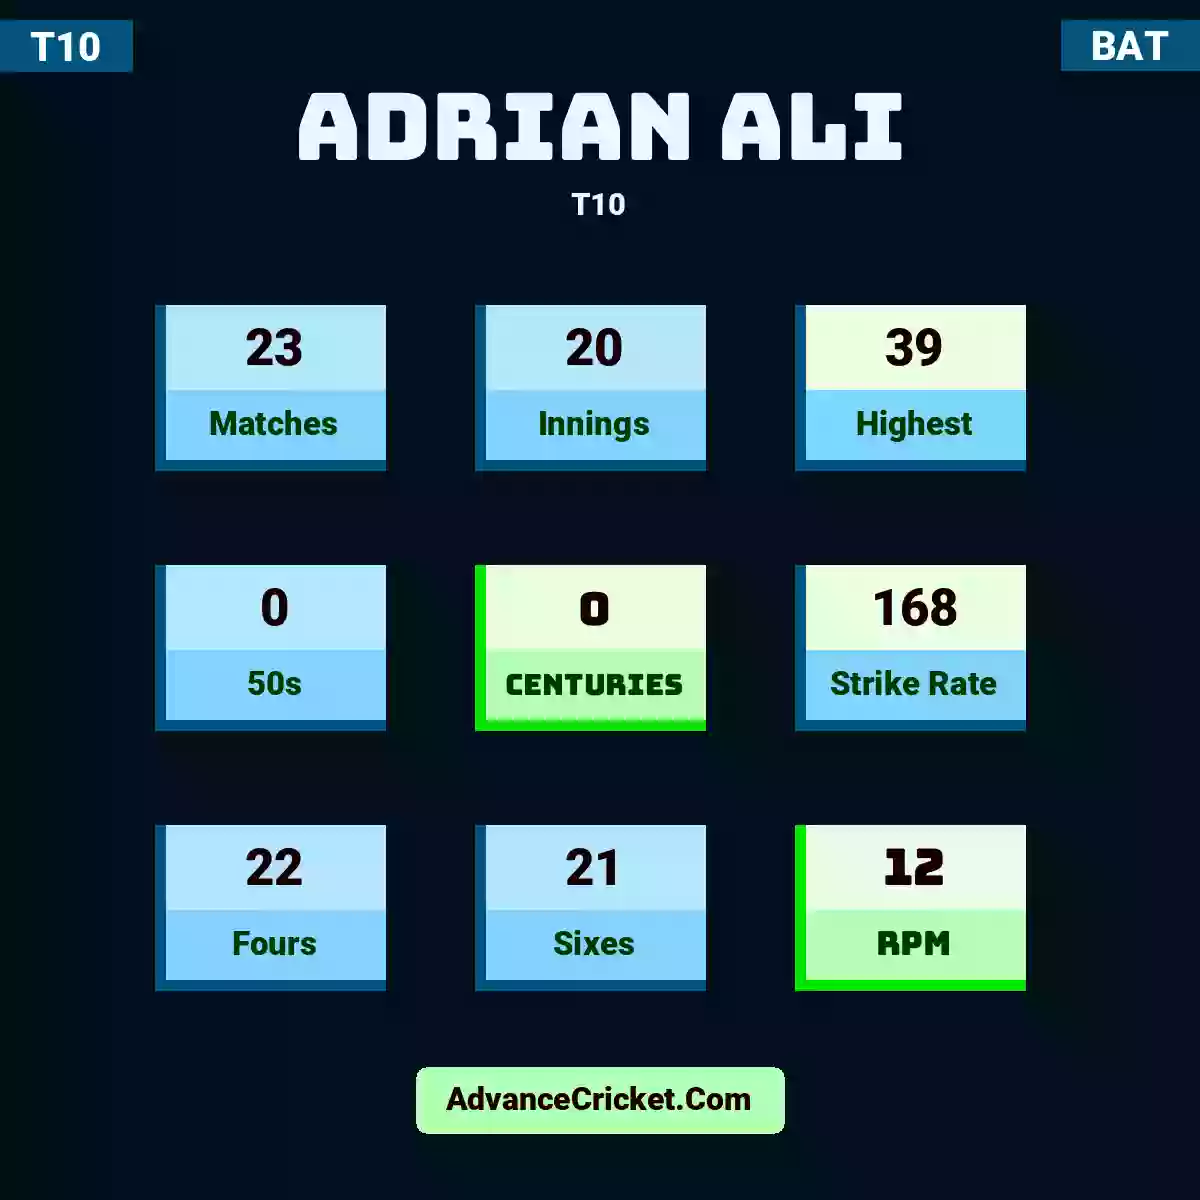 Adrian Ali T10 , Adrian Ali played 23 matches, scored 39 runs as highest, 0 half-centuries, and 0 centuries, with a strike rate of 168. a.ali hit 22 fours and 21 sixes, with an RPM of 12.